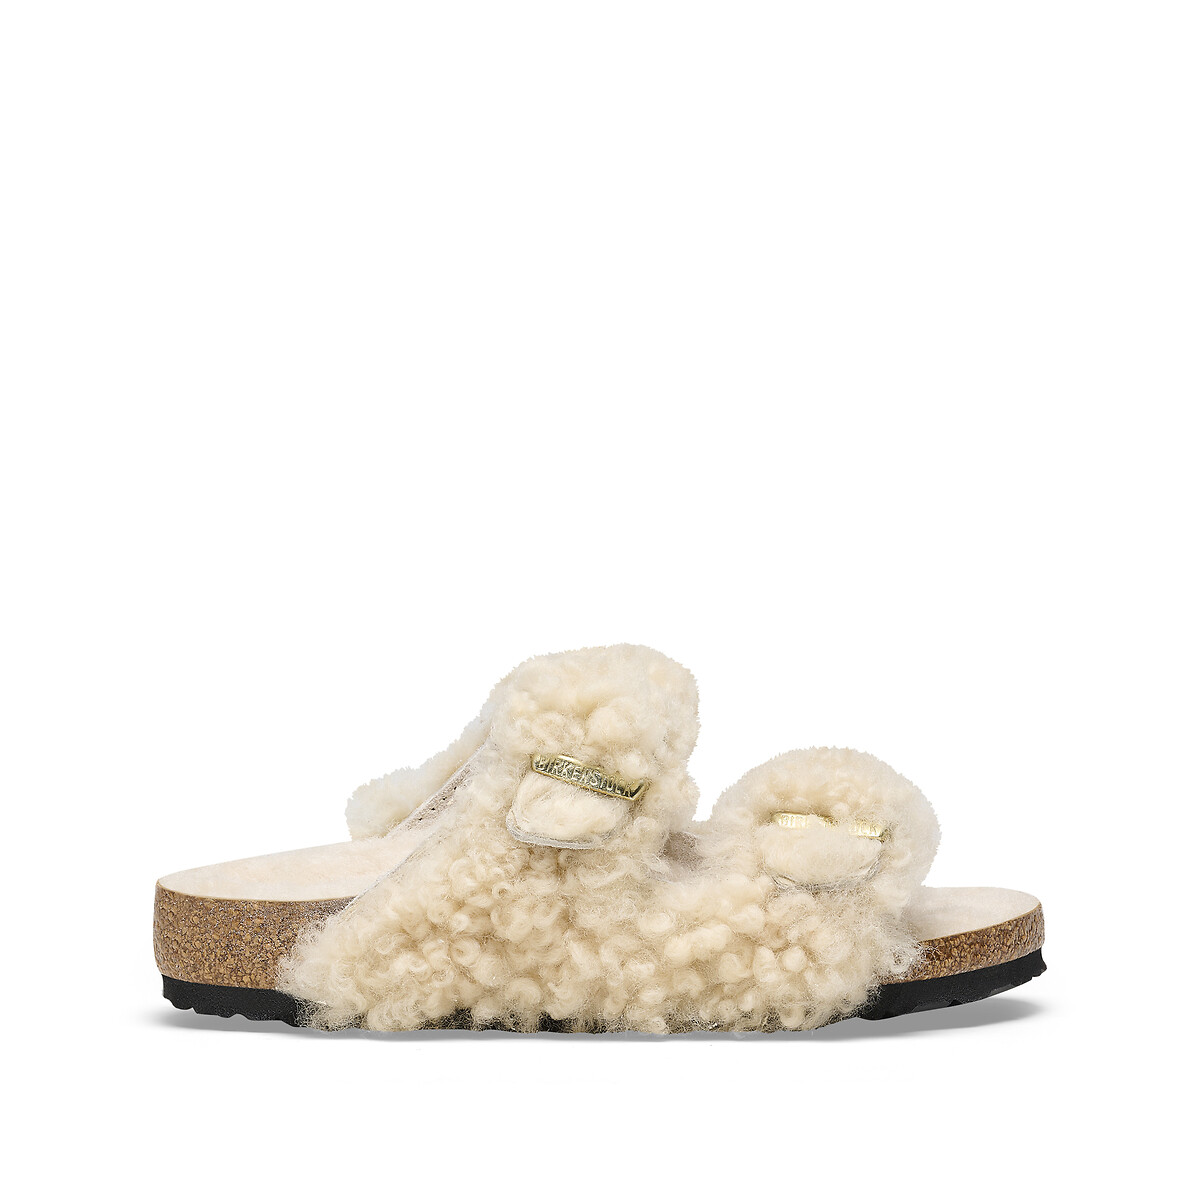 Arizona Teddy Rivet Mules in Wool with Shearling Lining